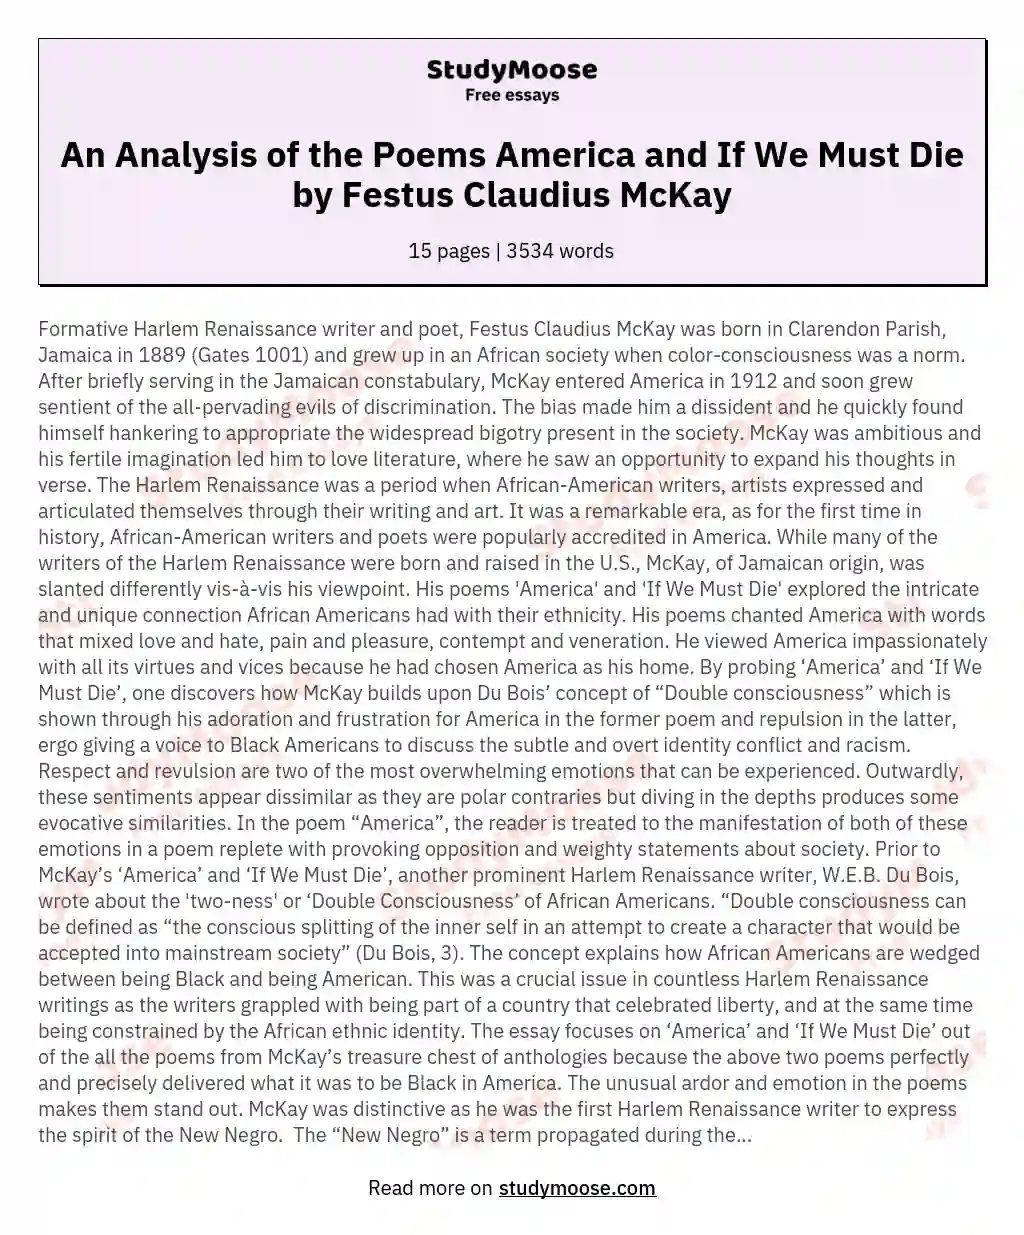 An Analysis of the Poems America and If We Must Die by Festus Claudius McKay